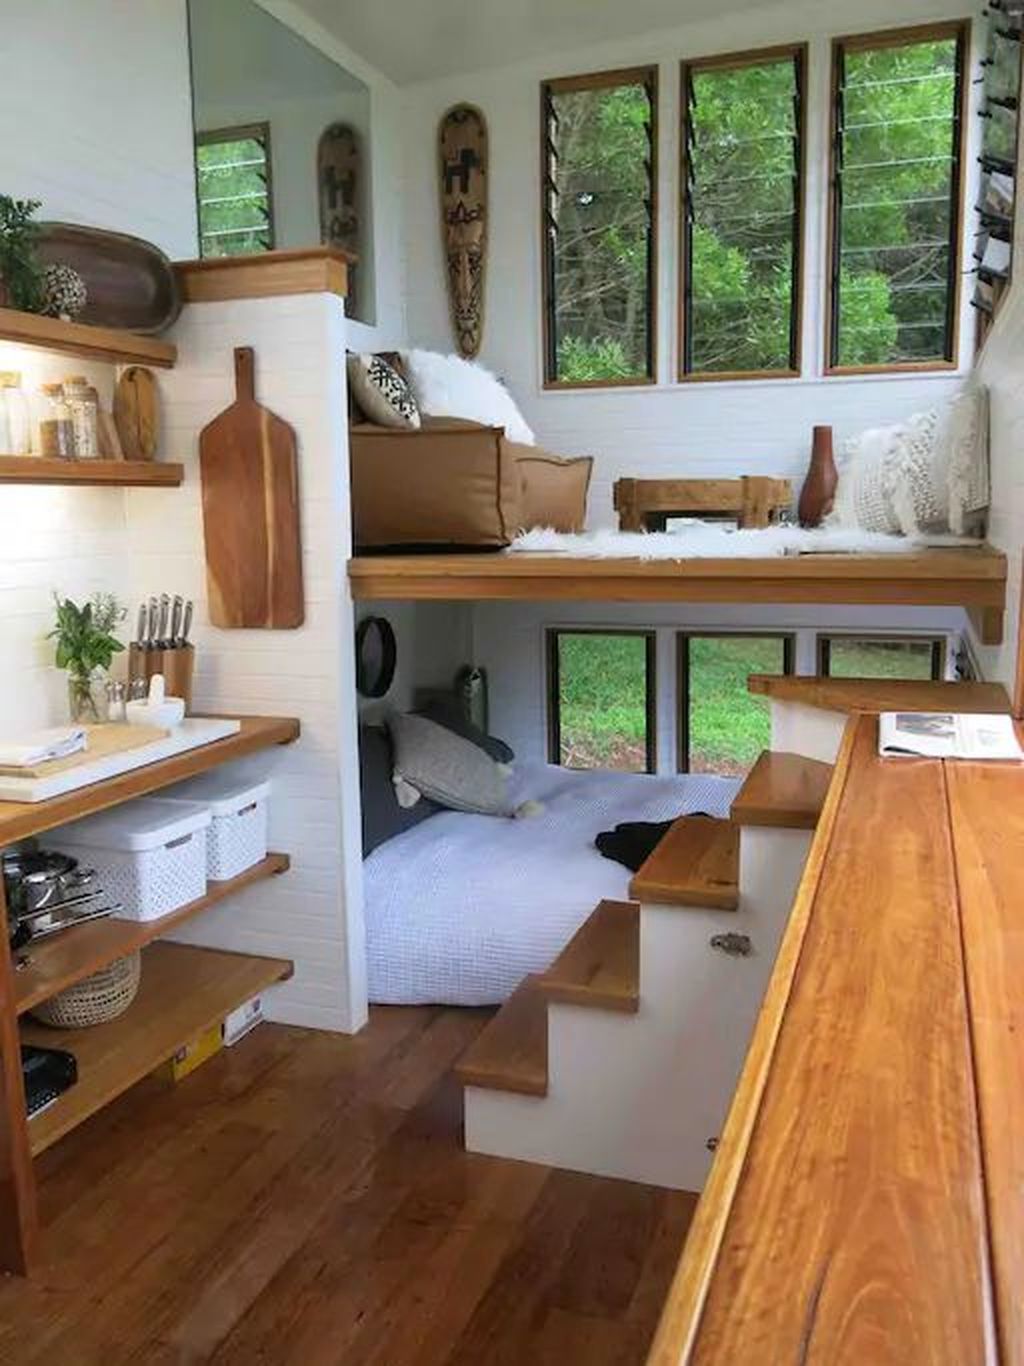 Space efficient Furniture Designs For Small Homes